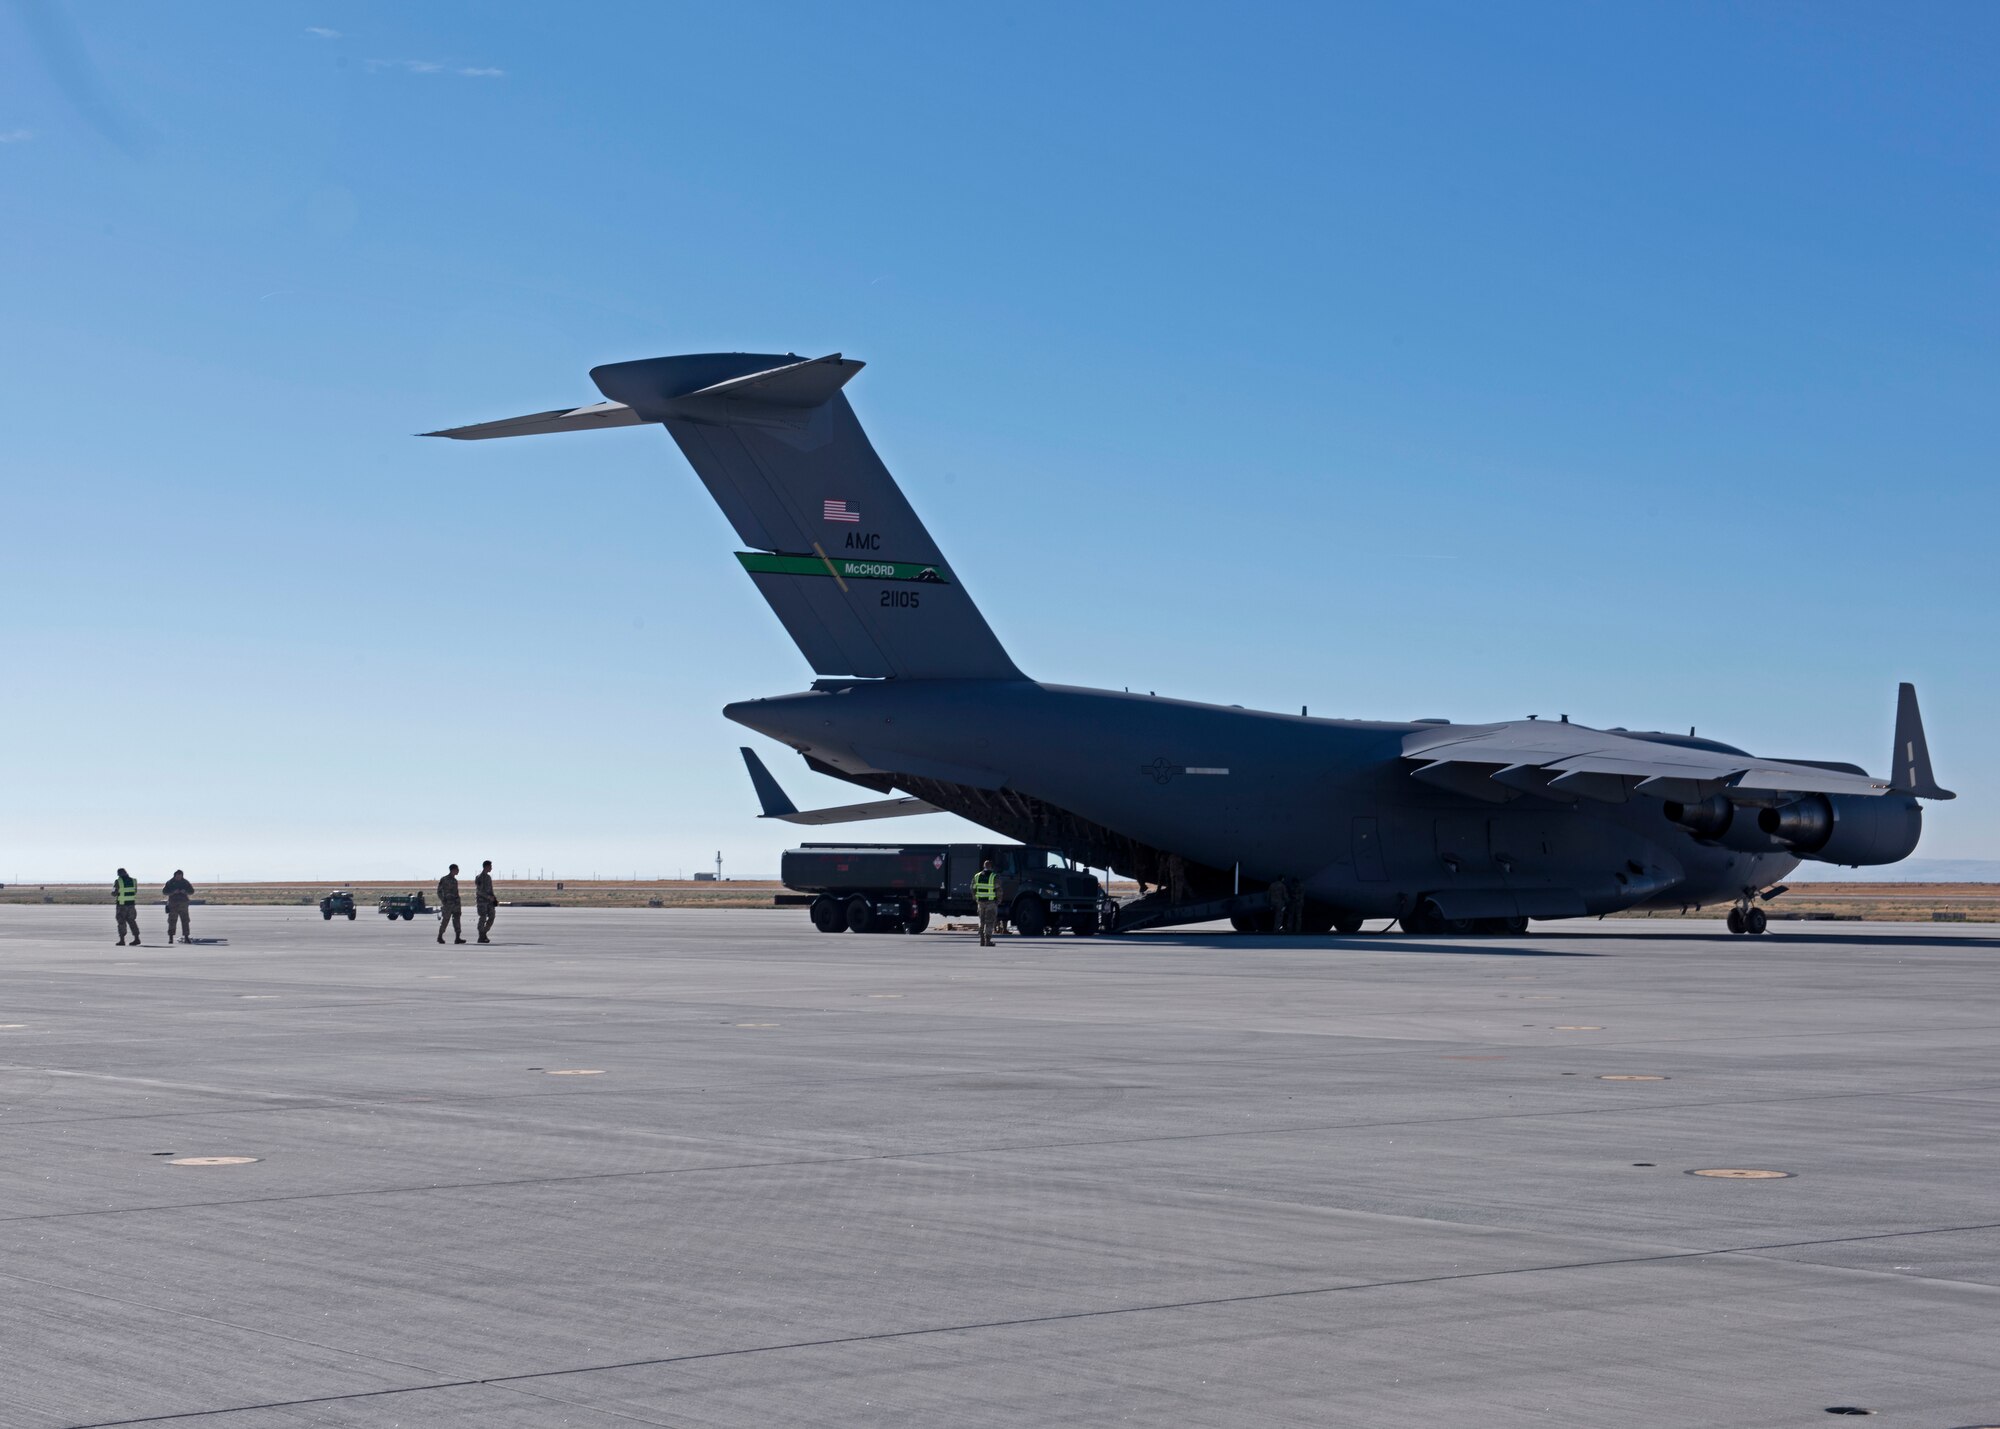 U.S. Airmen with the simulated 7th Expeditionary Airlift Squadron fuel a C-17 Globemaster III aircraft during Exercise Rainier War 22B at Mountain Home Air Force Base, Idaho, Oct. 17, 2022. Airmen from multiple Team McChord units came together to form the 7th EAS during Rainier War 22B; which is a full-scale readiness exercise simulating a deployment in support of U.S. Indo-Pacific areas of responsibility. (U.S. Air Force photo by Staff Sgt. Zoe Thacker)